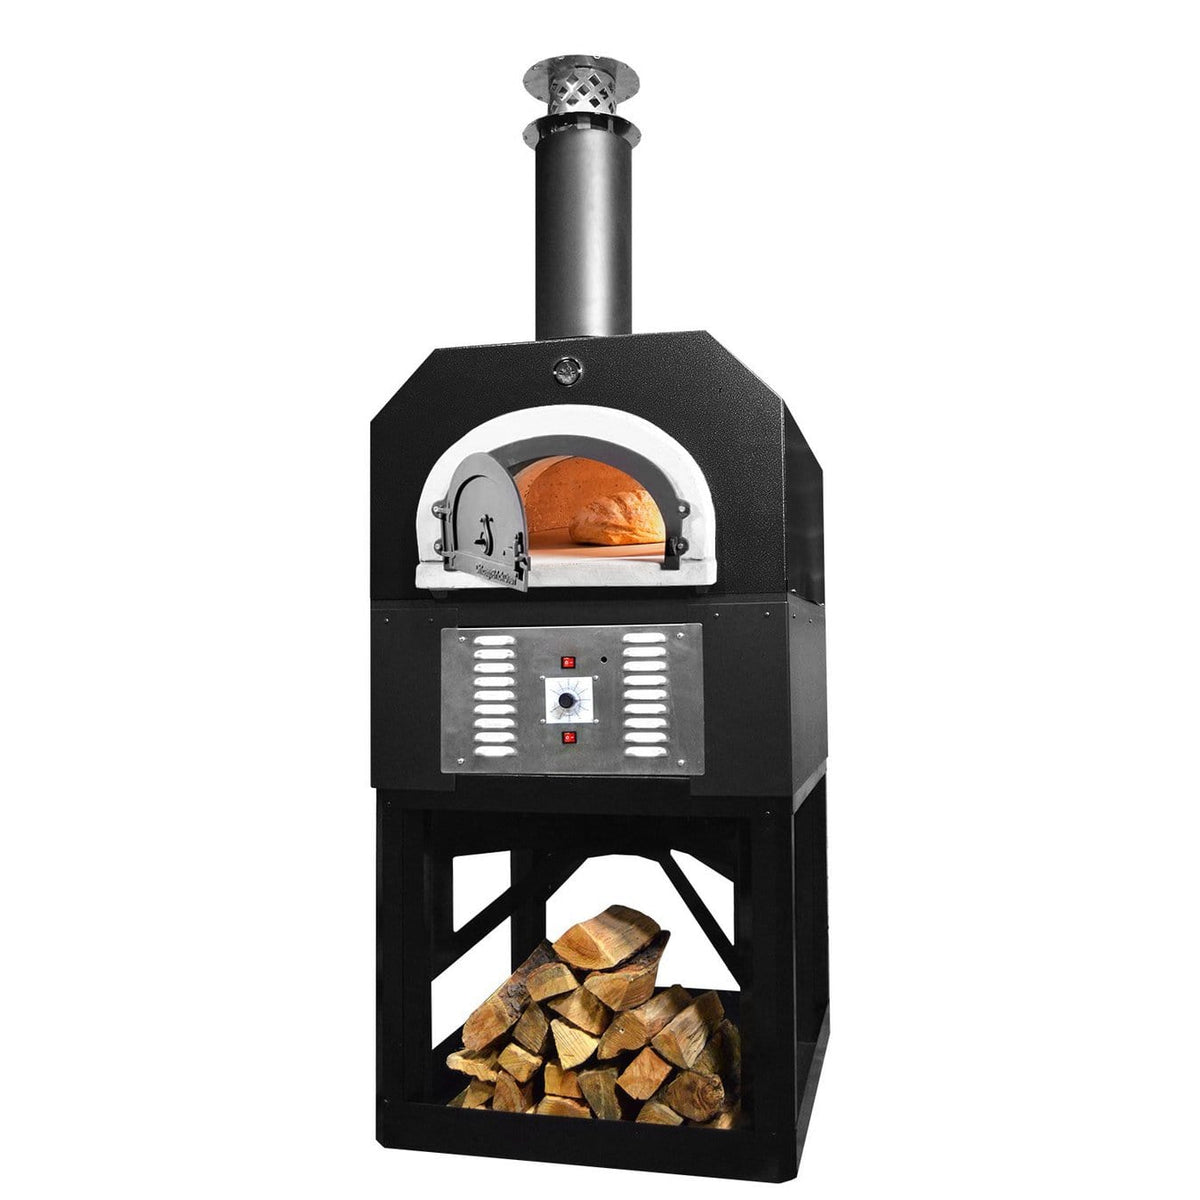 Chicago Brick Oven Pizza Ovens Chicago Brick Oven Dual Fuel Pizza Oven / CBO-750 on Stand / Hybrid (Gas/Wood) / CBO-O-STD-750-HYB